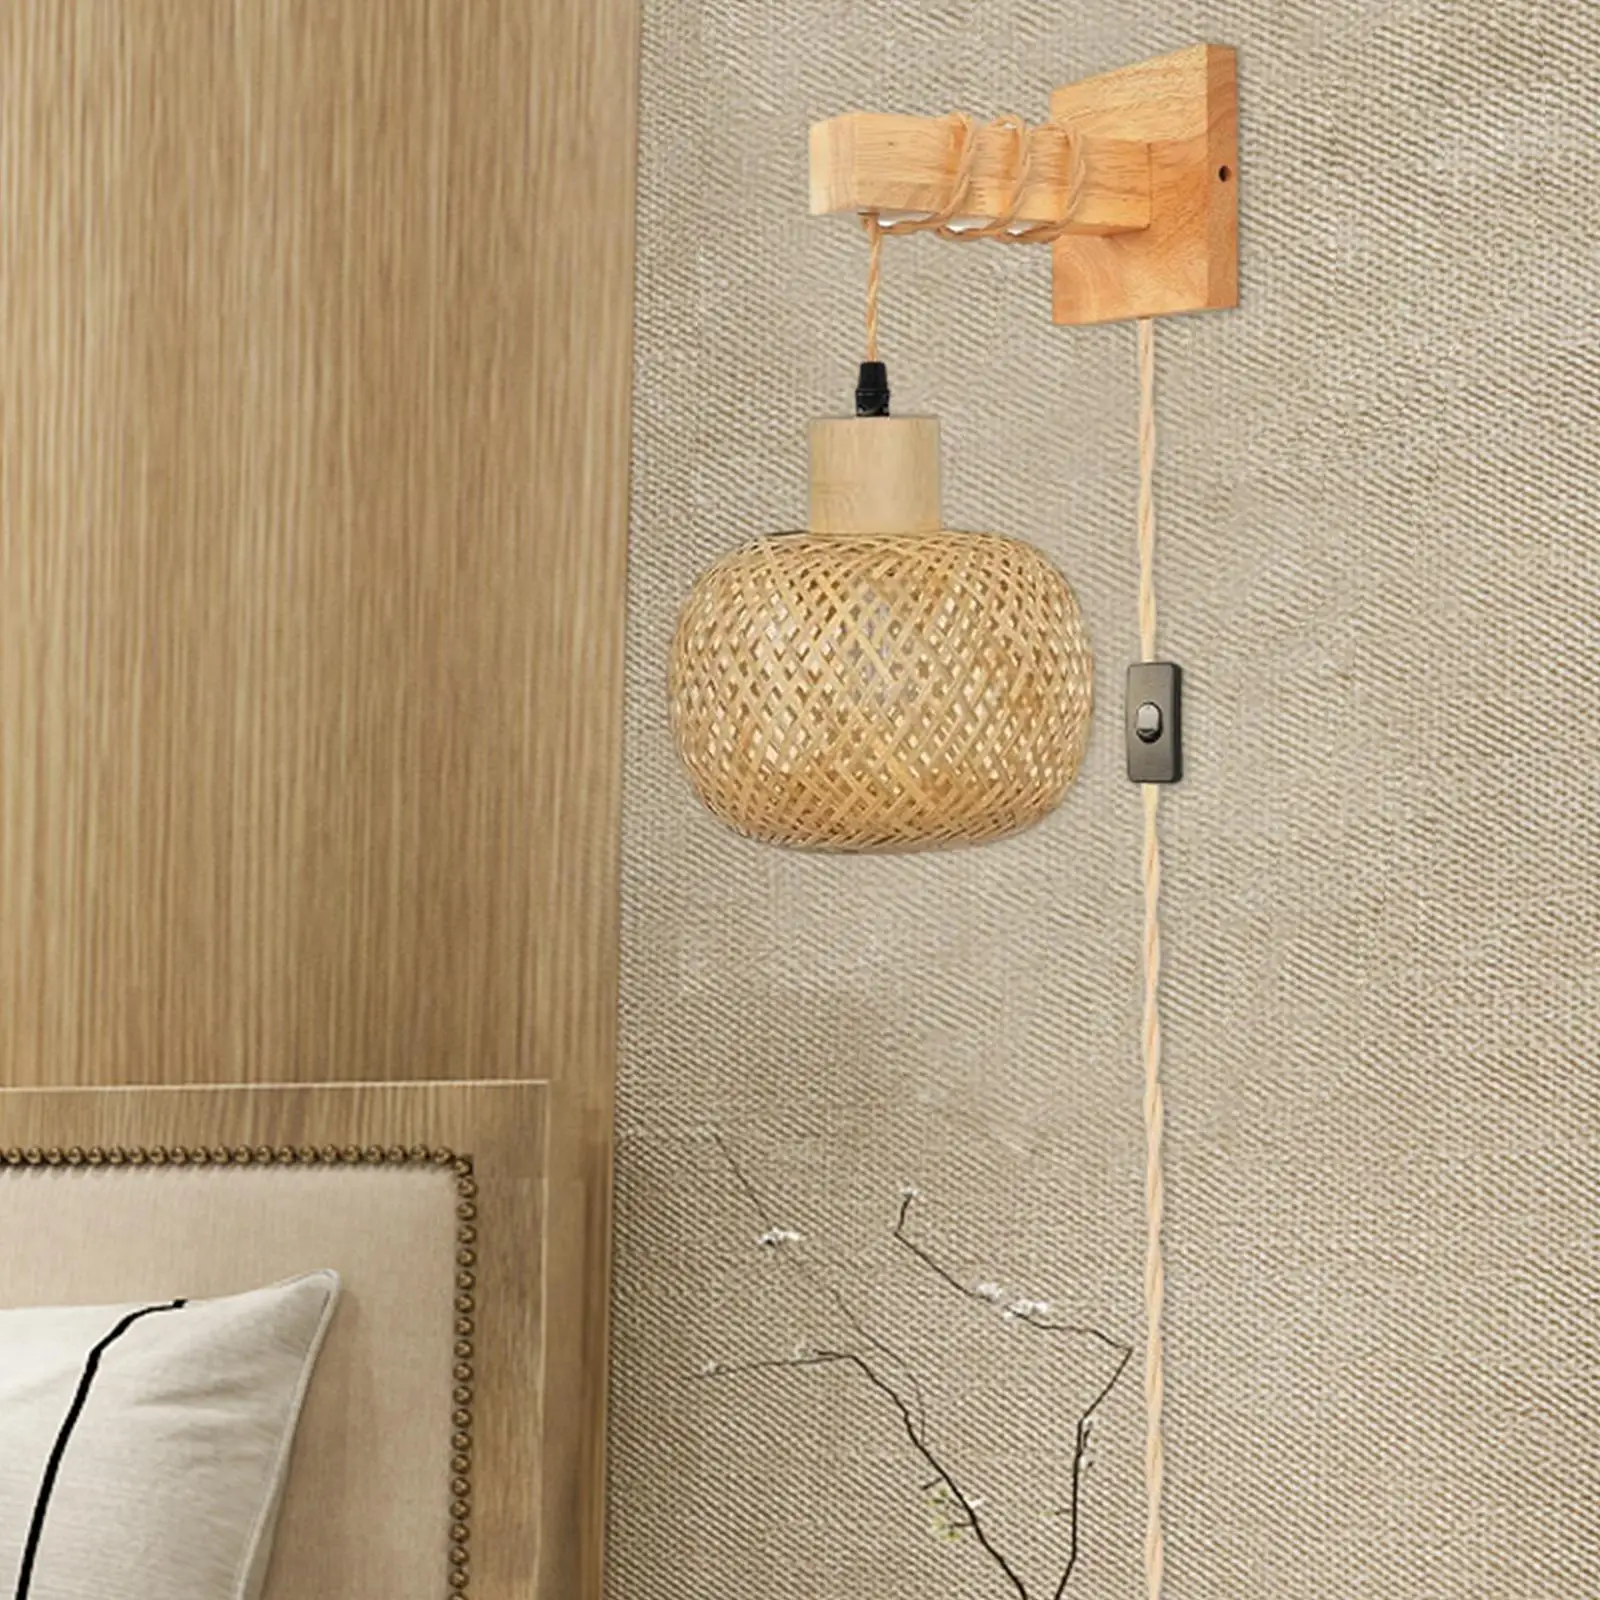 Bamboo Wall Sconce Decorative Bedside Light Fixture Farmhouse Hanging Lamp for Restaurant Hallway Reading Farmhouse Bedroom